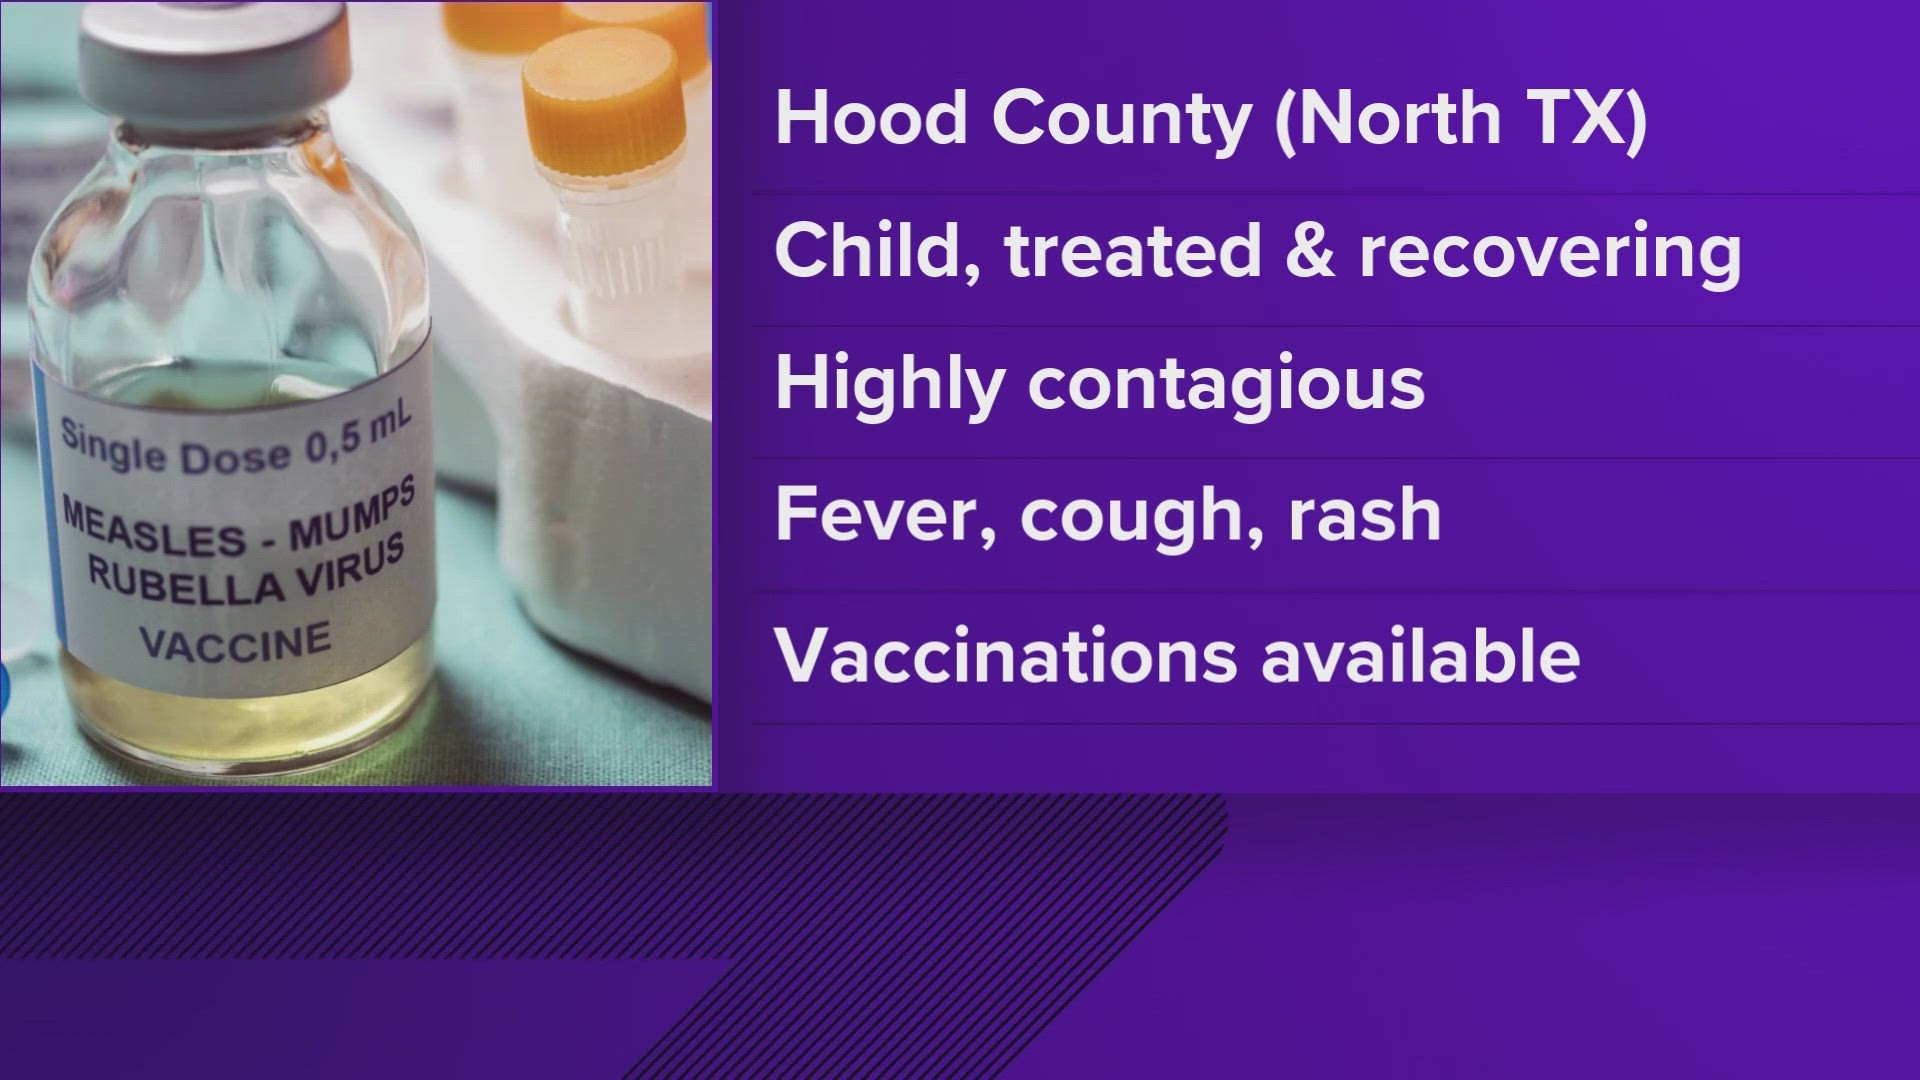 Texas health officials have reported the state's first confirmed case of measles since 2019.